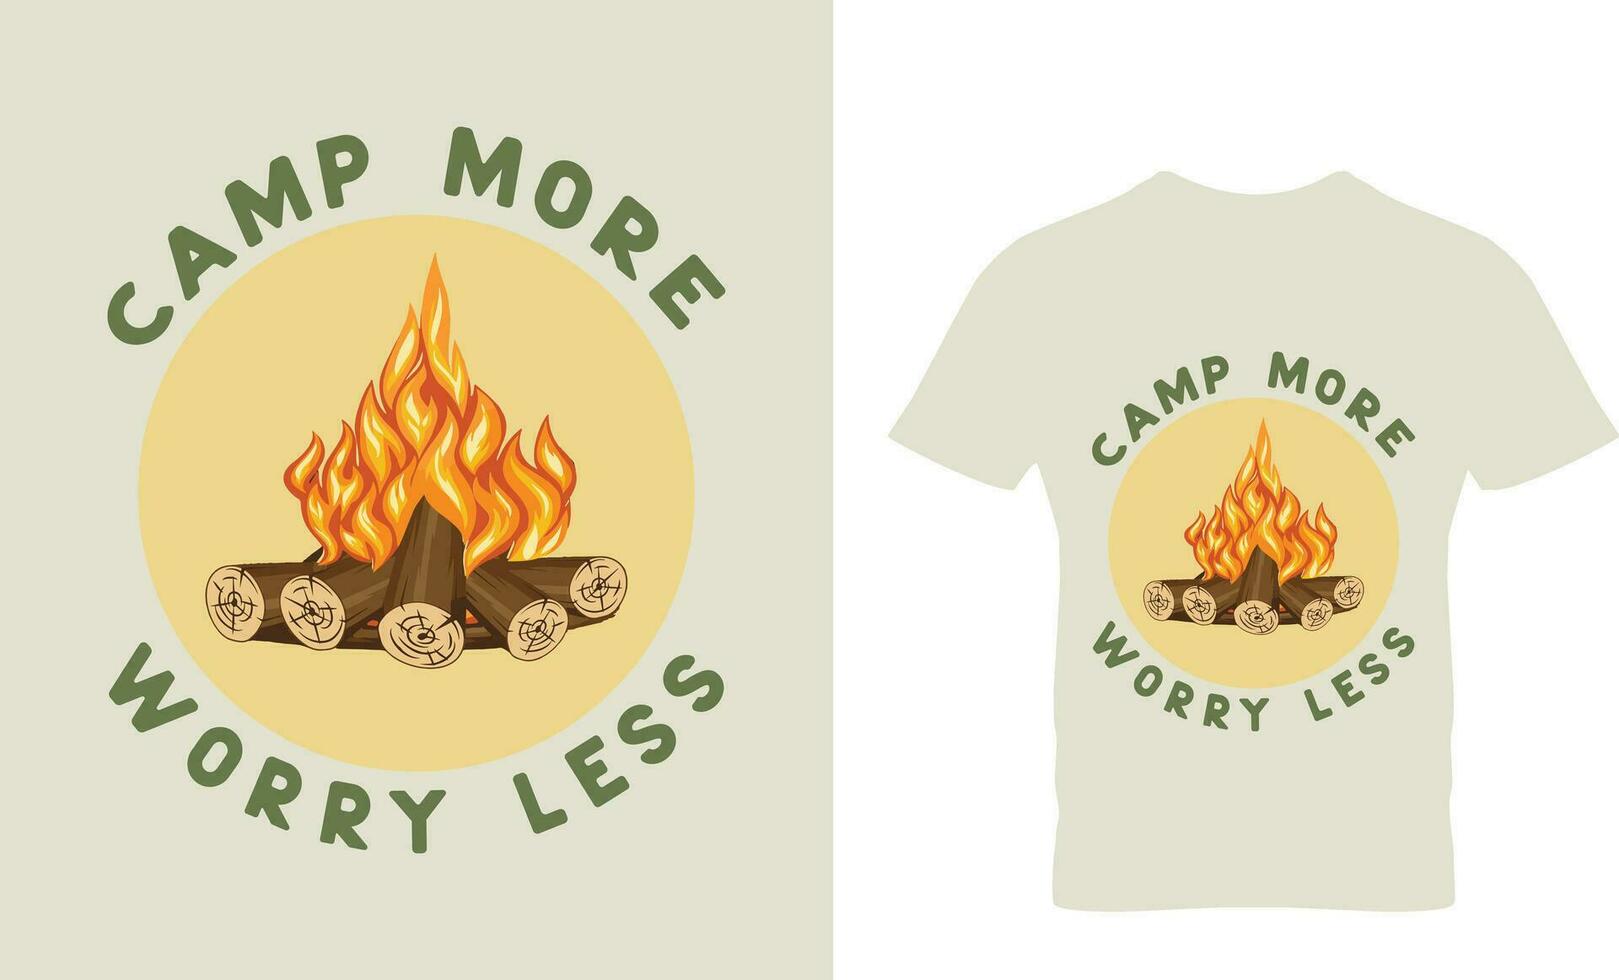 Camp more worry less badge design emblem with lantern. Travel label isolated t shirt design vector